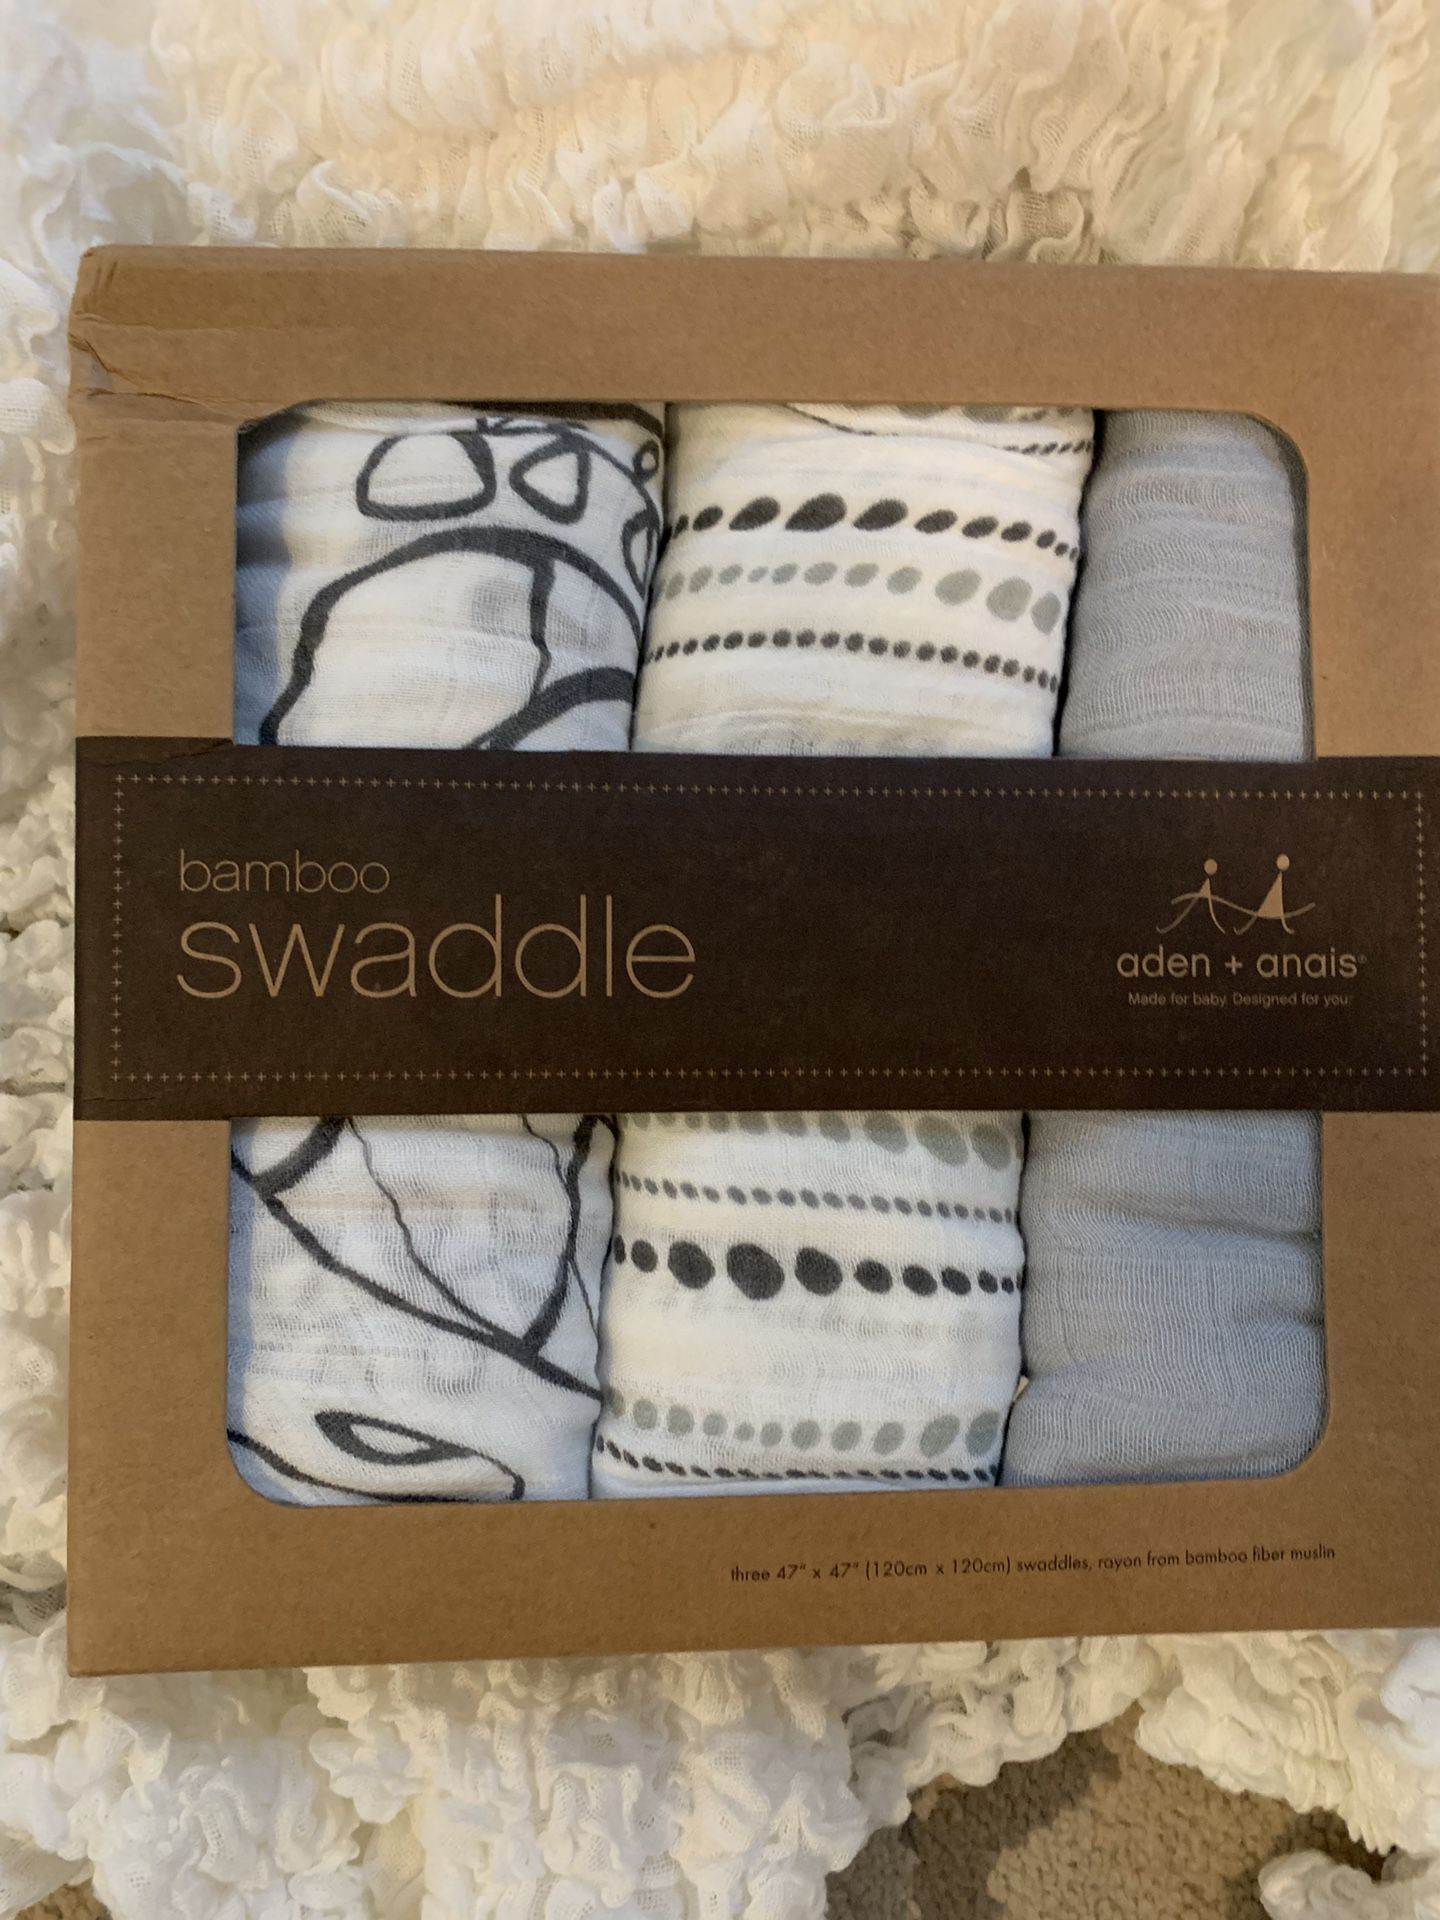 Aden and anais bamboo swaddles